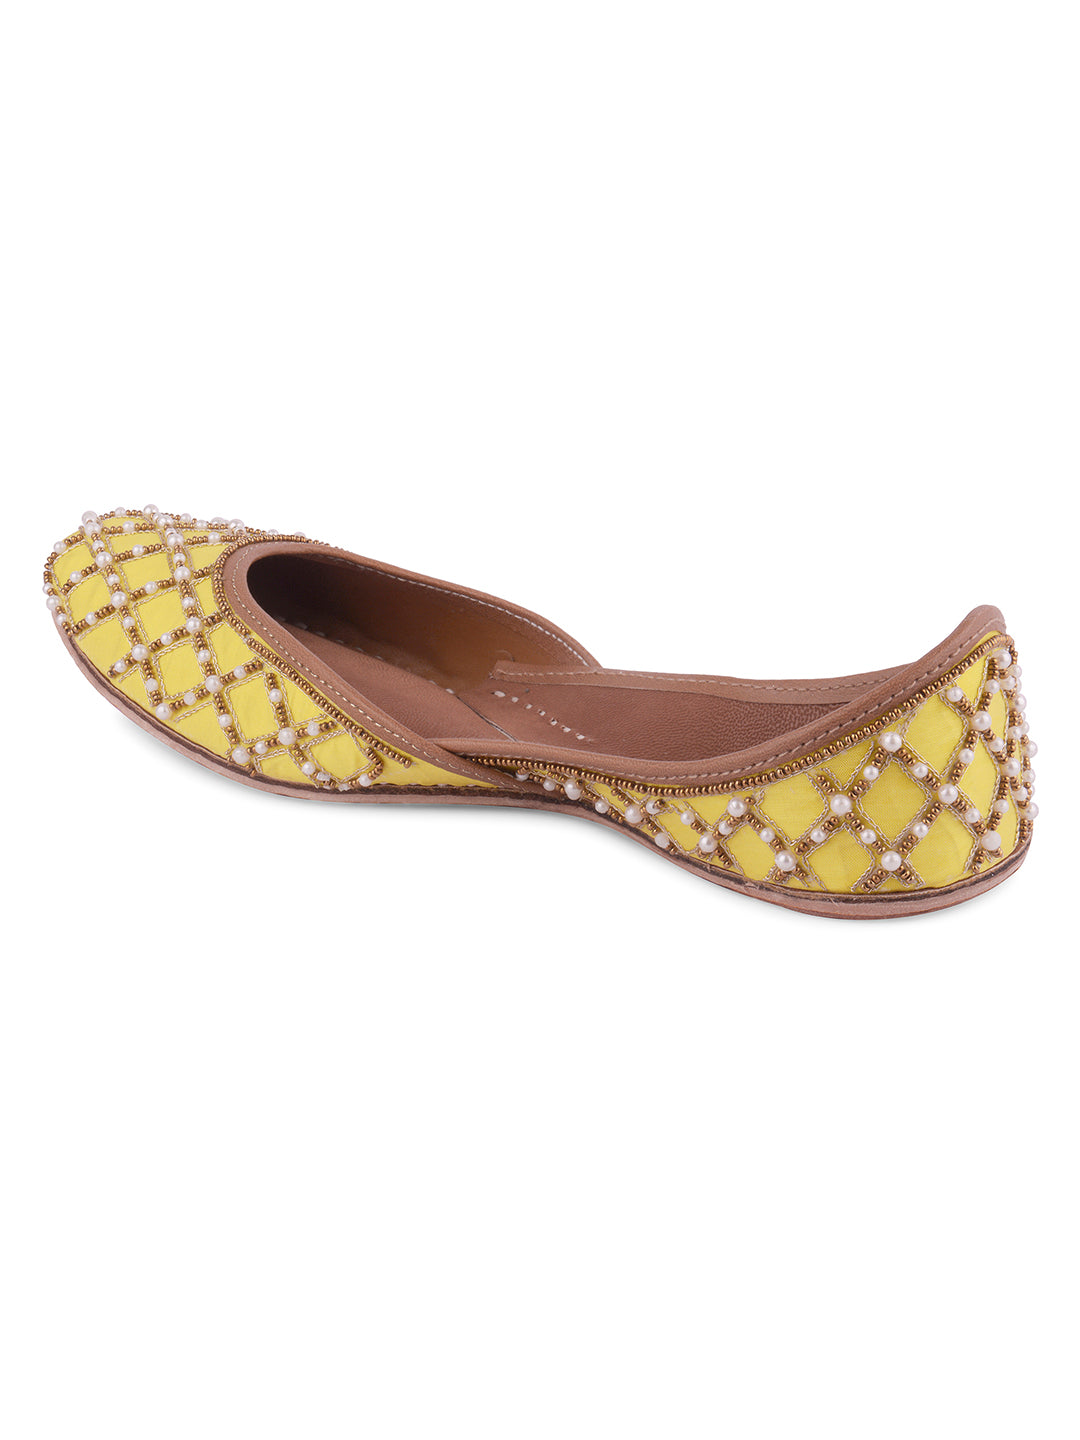 DESI COLOUR Women Brown Solid Leather Open Toe Flats